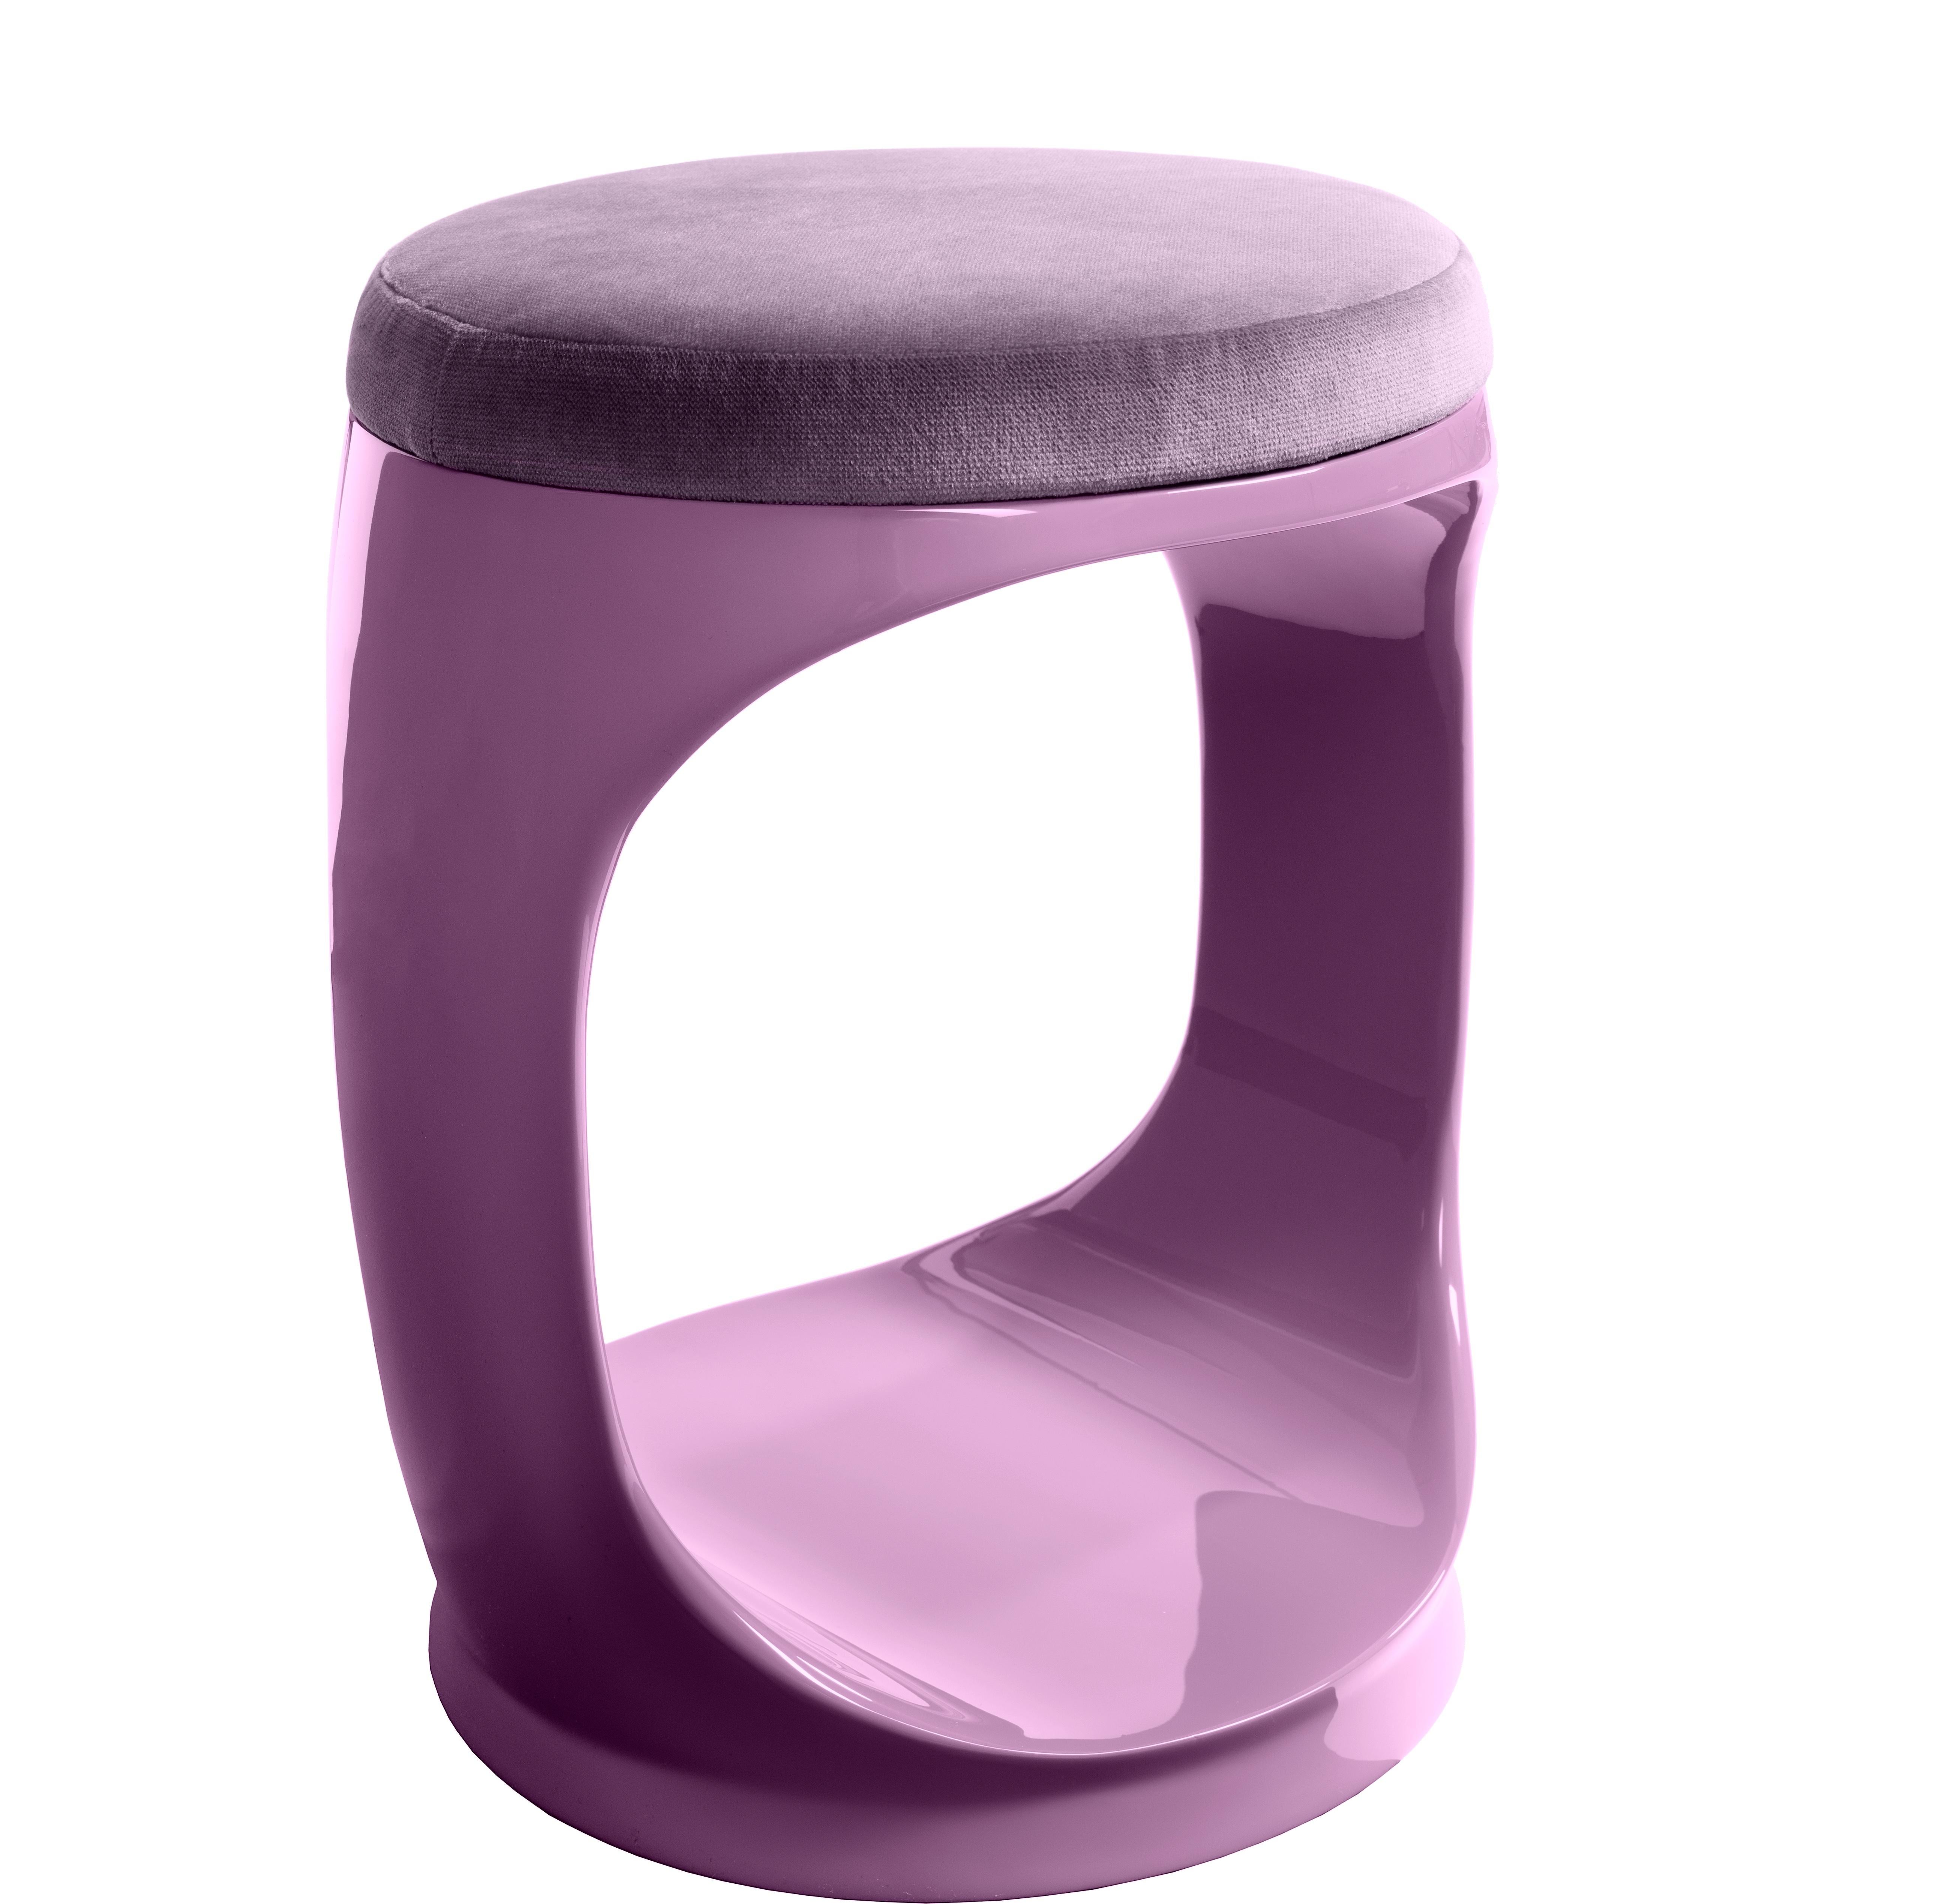 Contemporary Pouf by Cyril Rumpler Signet Ring, Hocker, Stool, lilac.
These stools are available in a dozen colors and in a glossy finish. The black, white, navy blue, pink, red, turquoise, lilac, brown, green, and grey stools are available with a